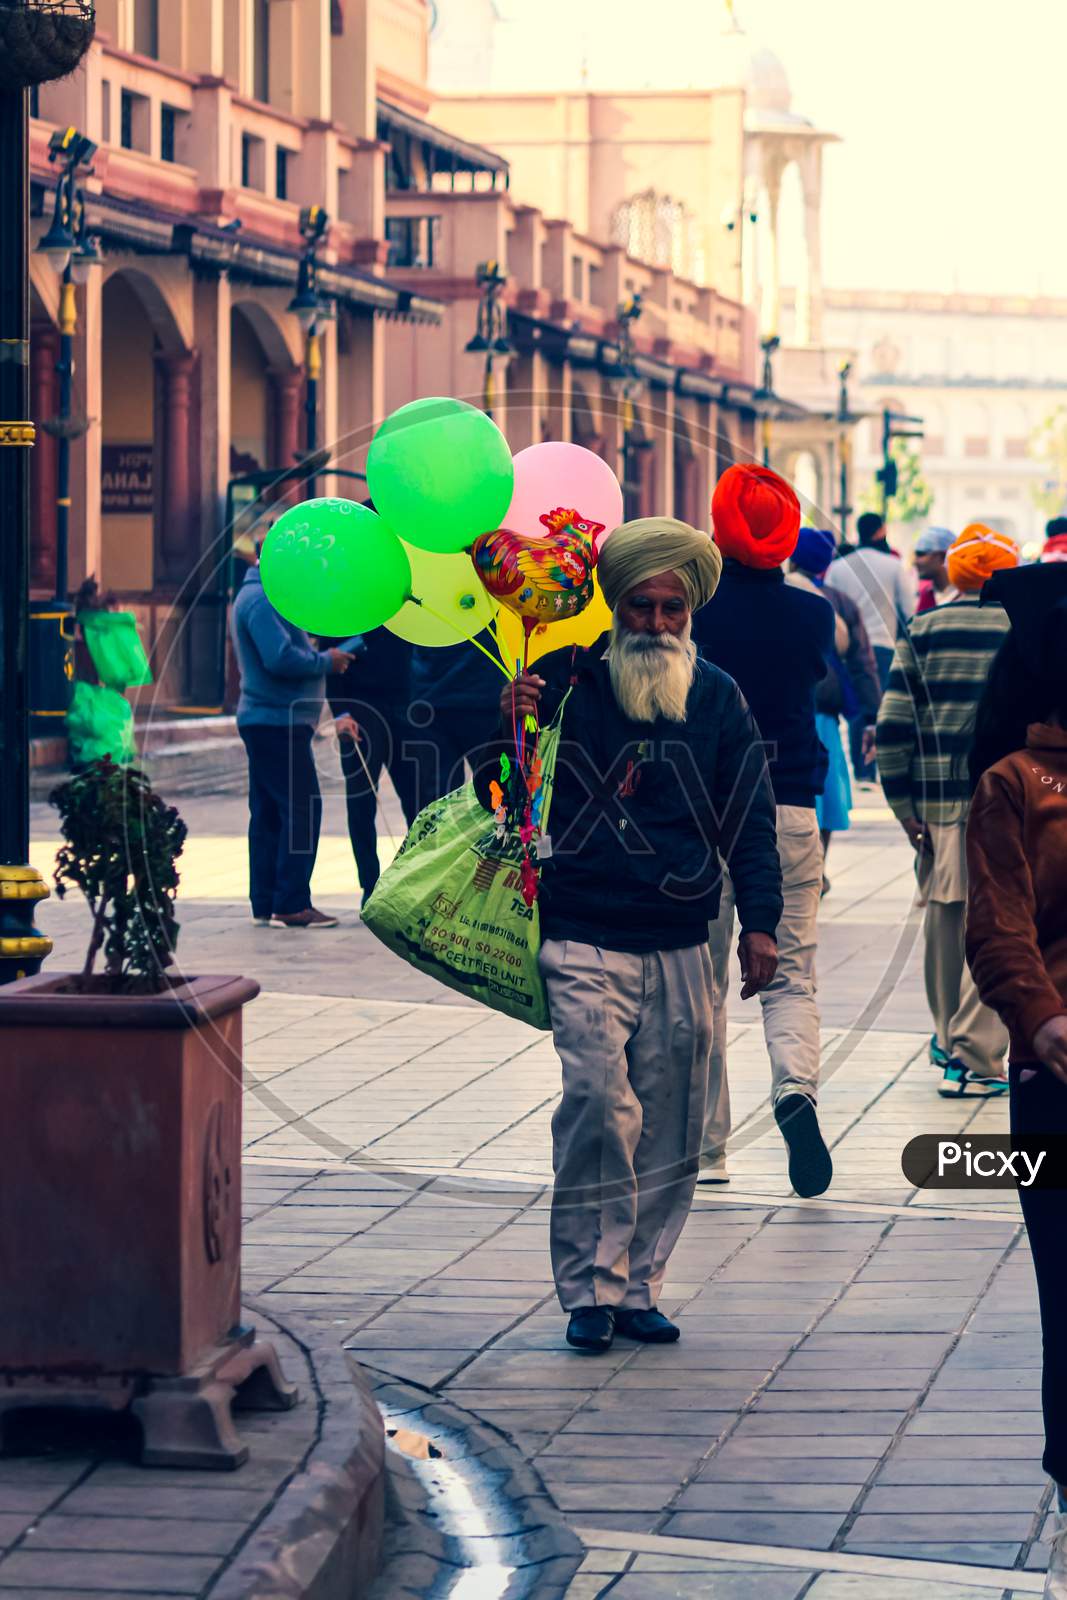 an old man selling balloons walking on the street